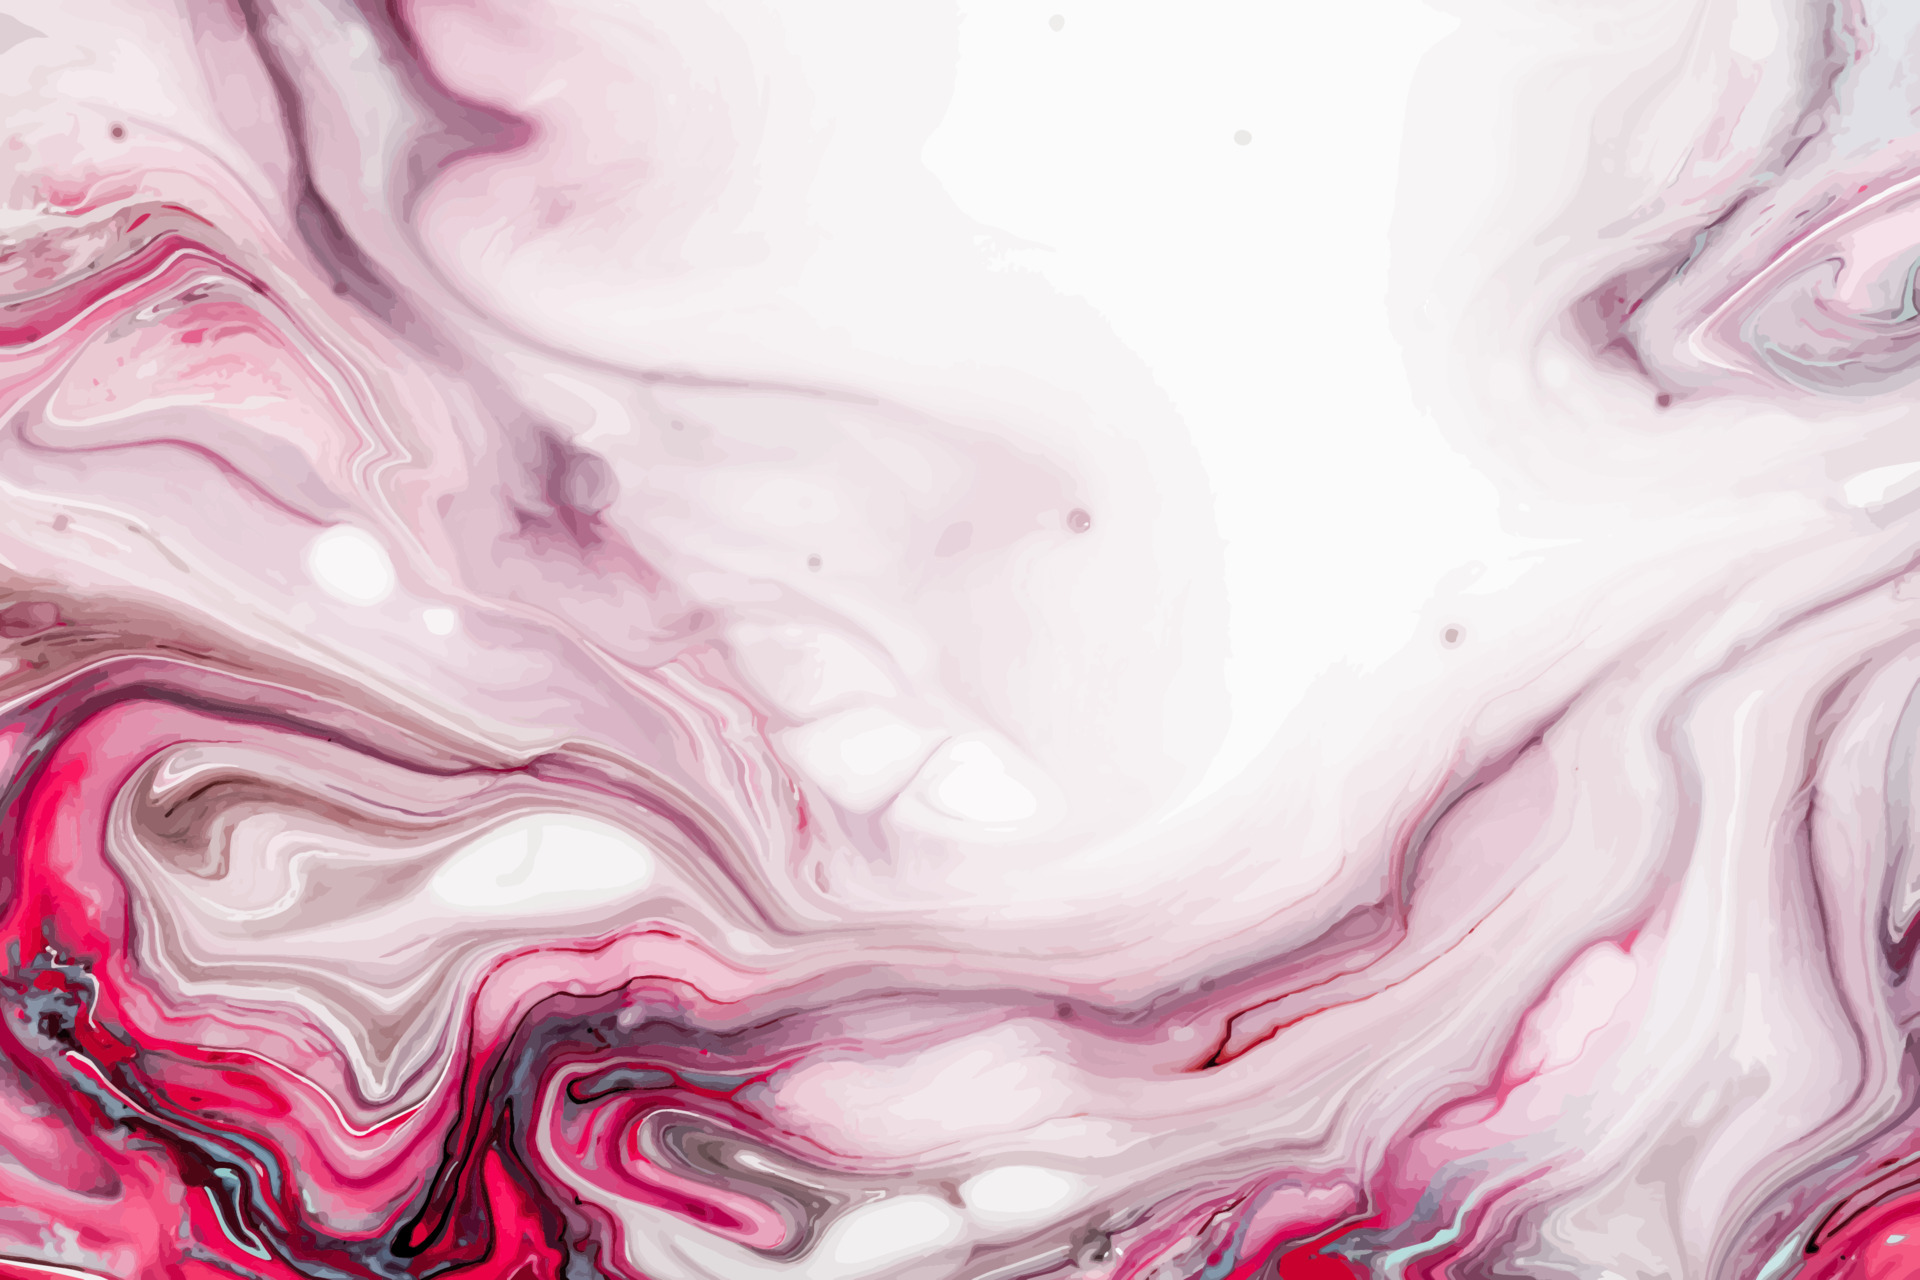 Liquid marble texture. Abstract painting background for wallpaper, posters, cards, invitations, websites. Fluid art